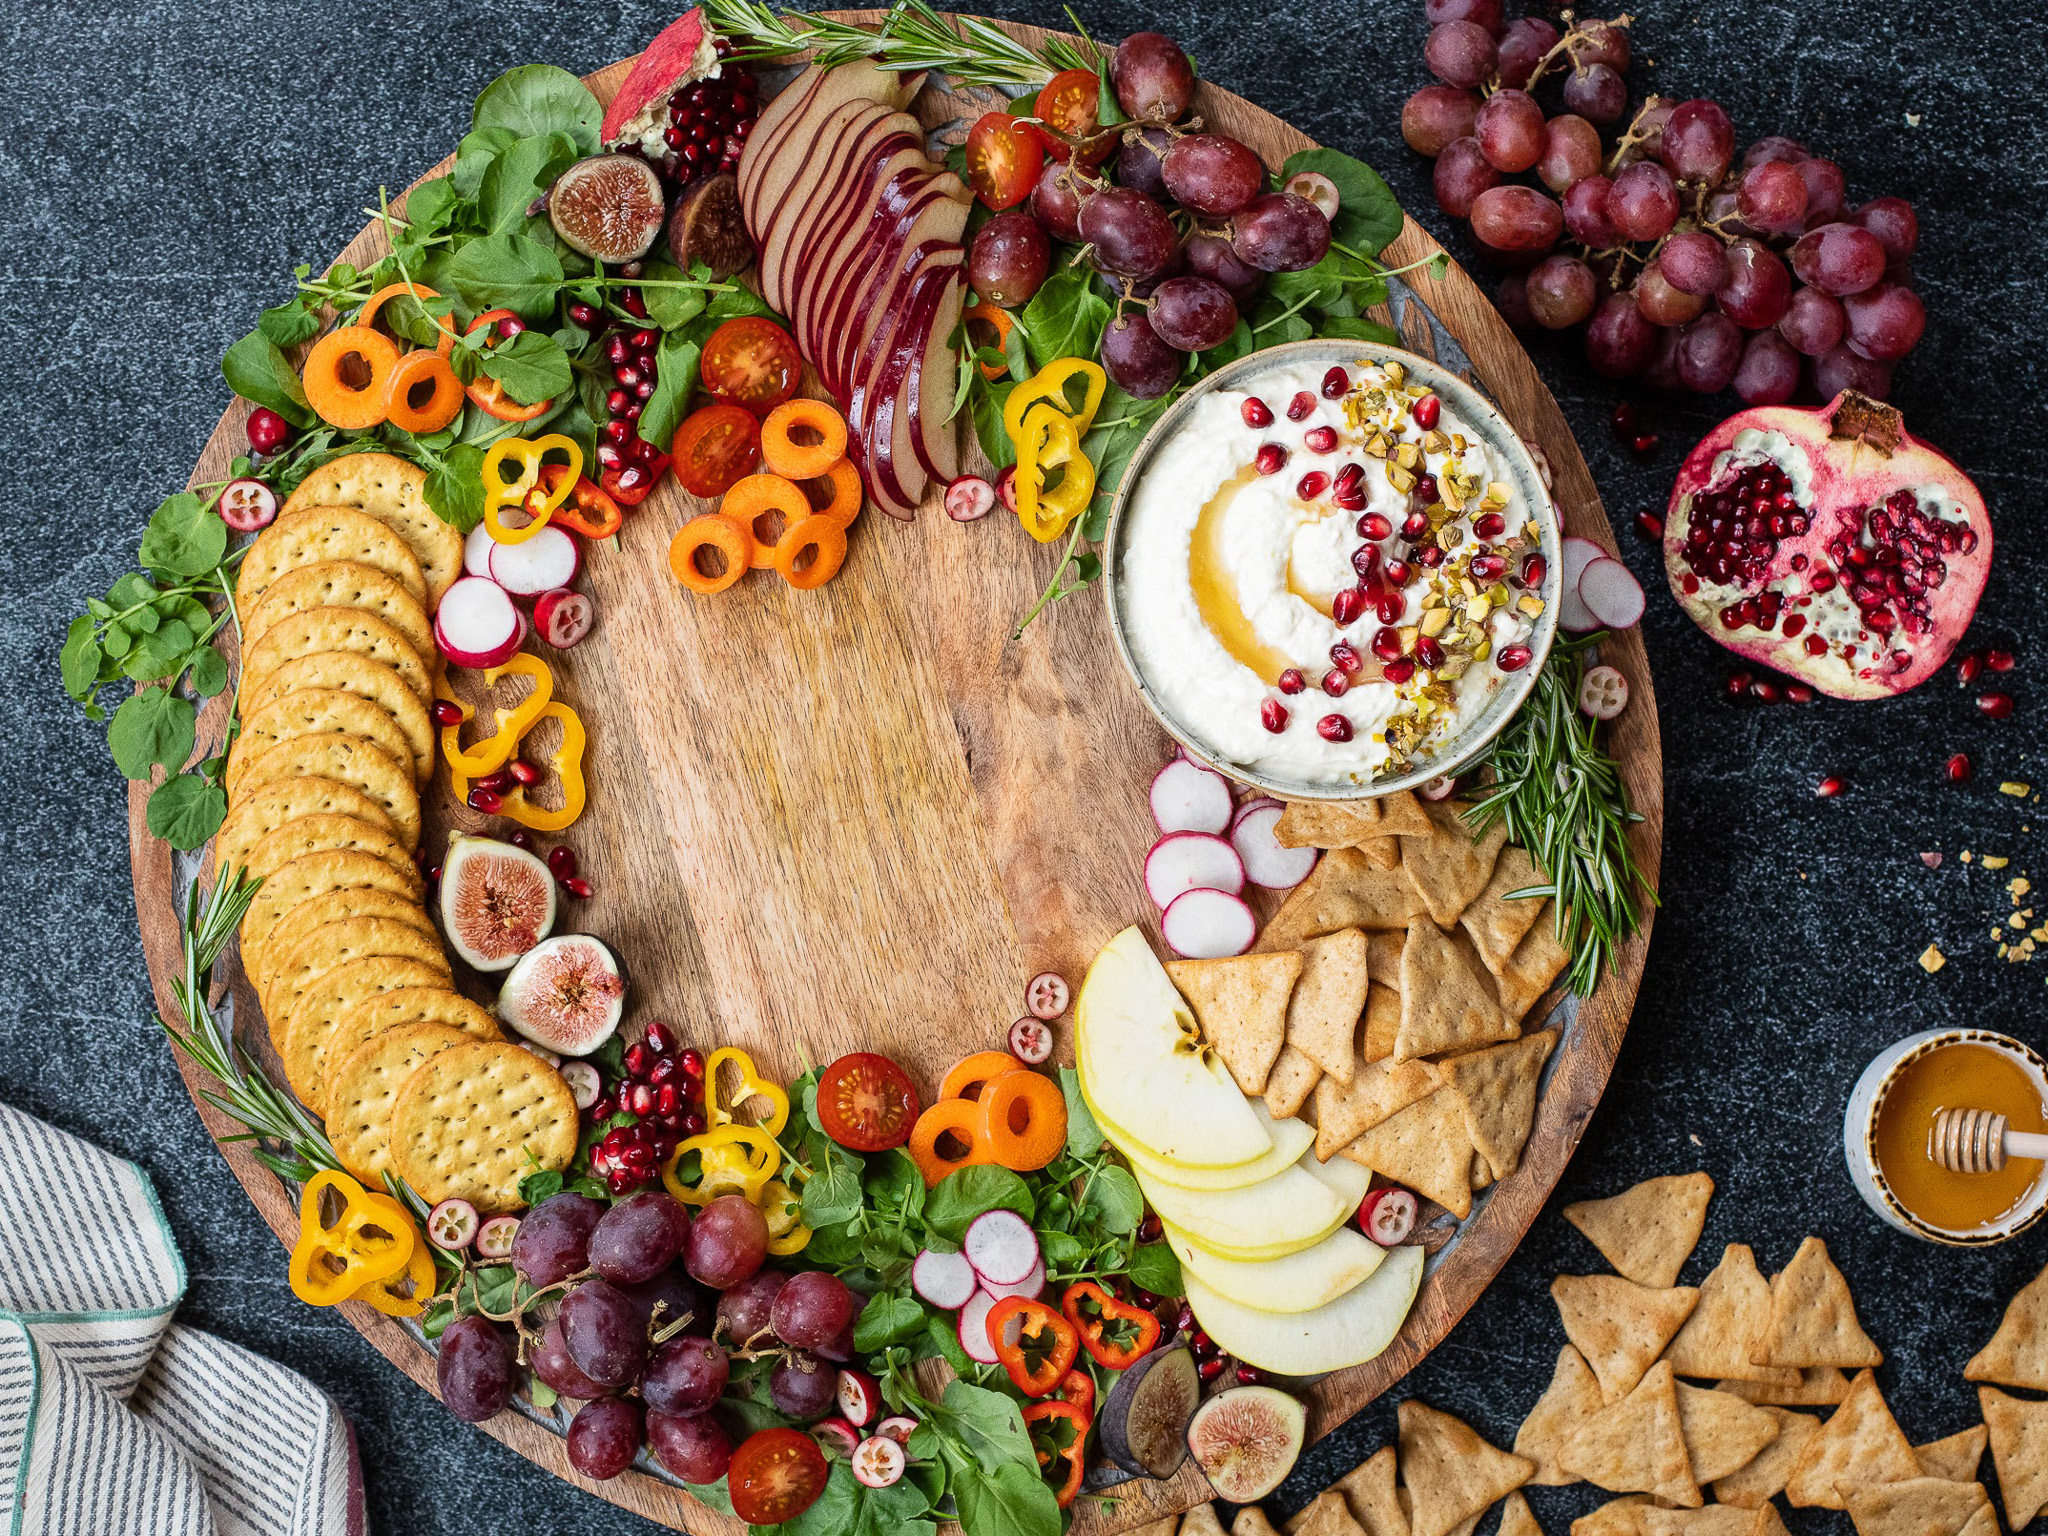 Include This Whipped Feta Dip On Your Holiday Charcuterie Wreath